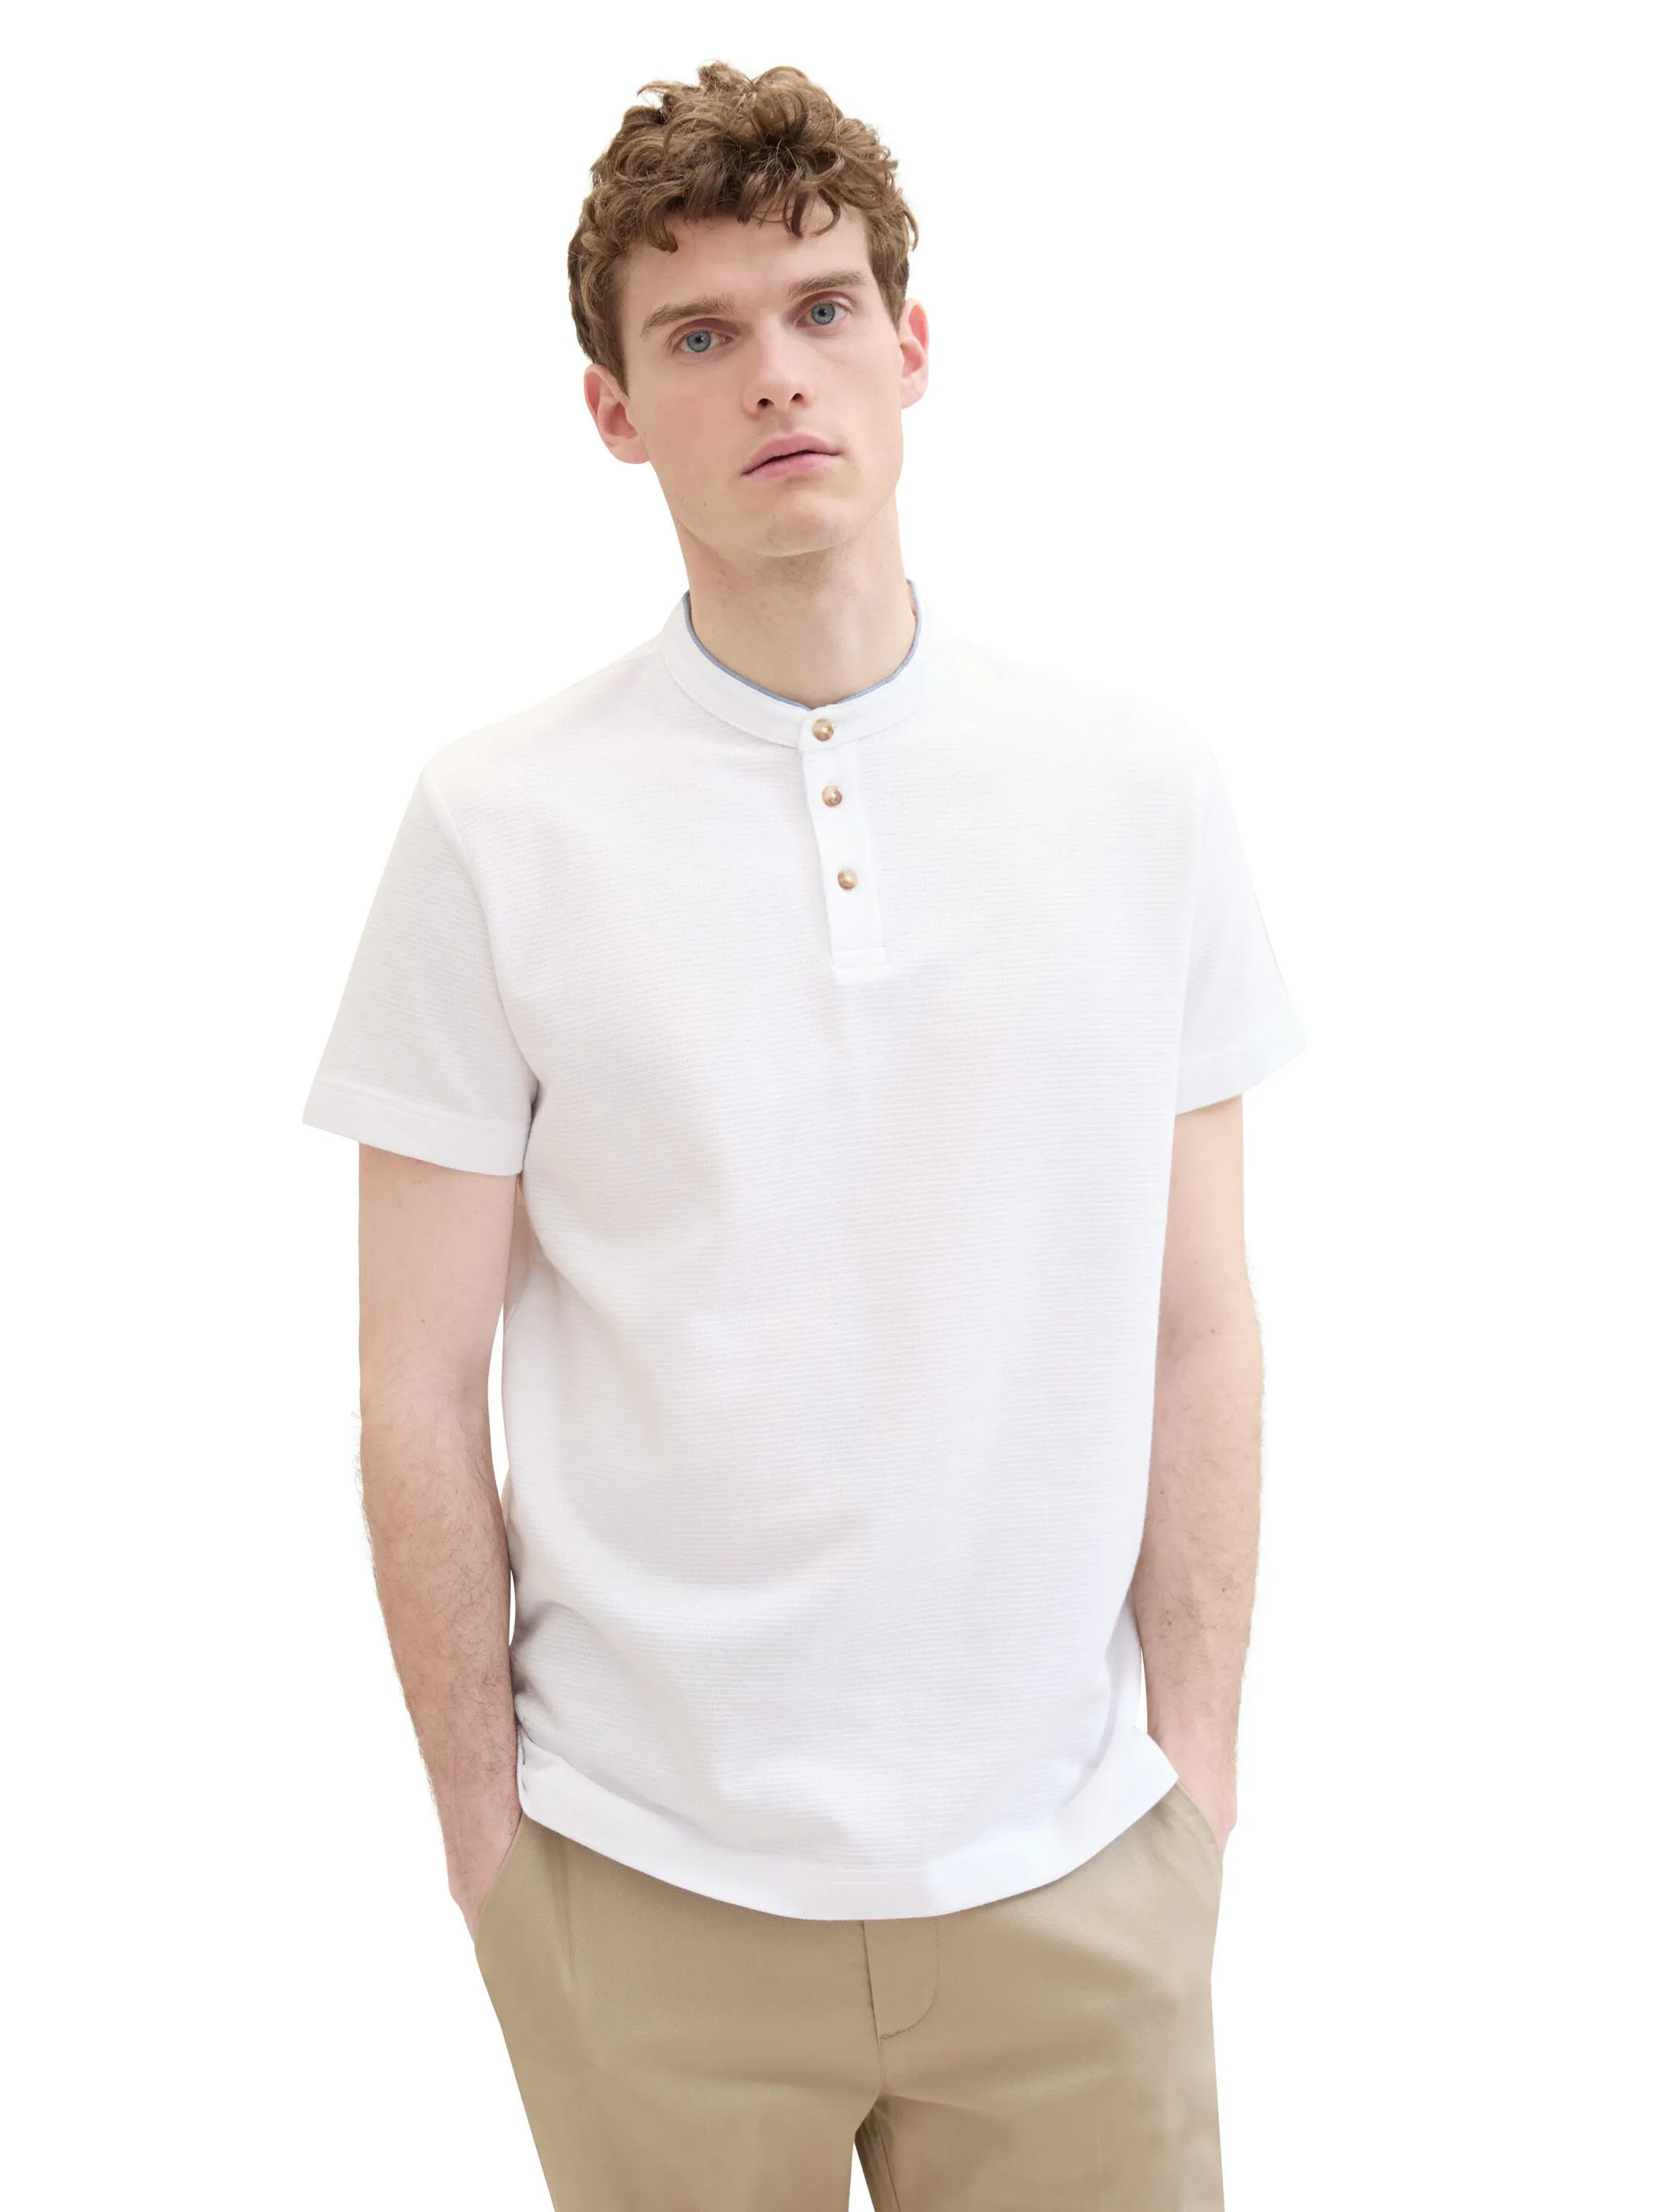 Tom Tailor 1041809 structured stand-up polo Weiß 895687 20000 3